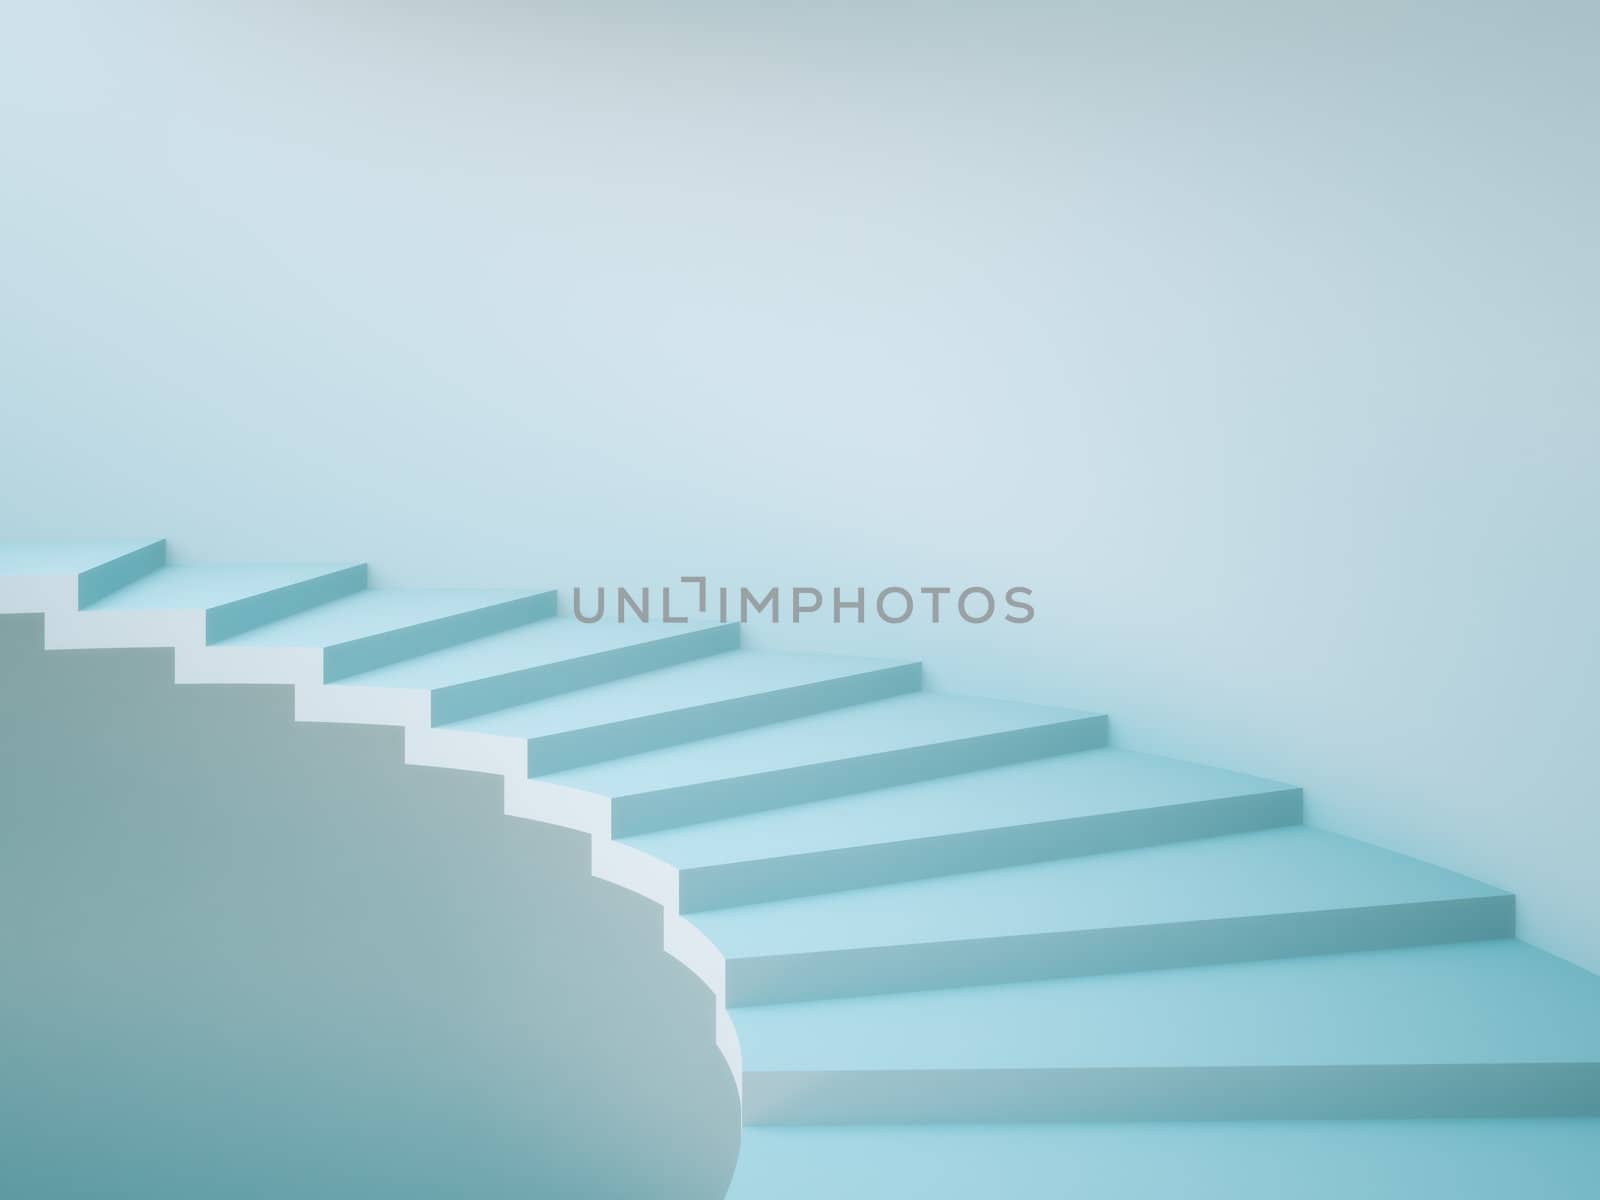 Spiral Staircase Background. Concept Illustration